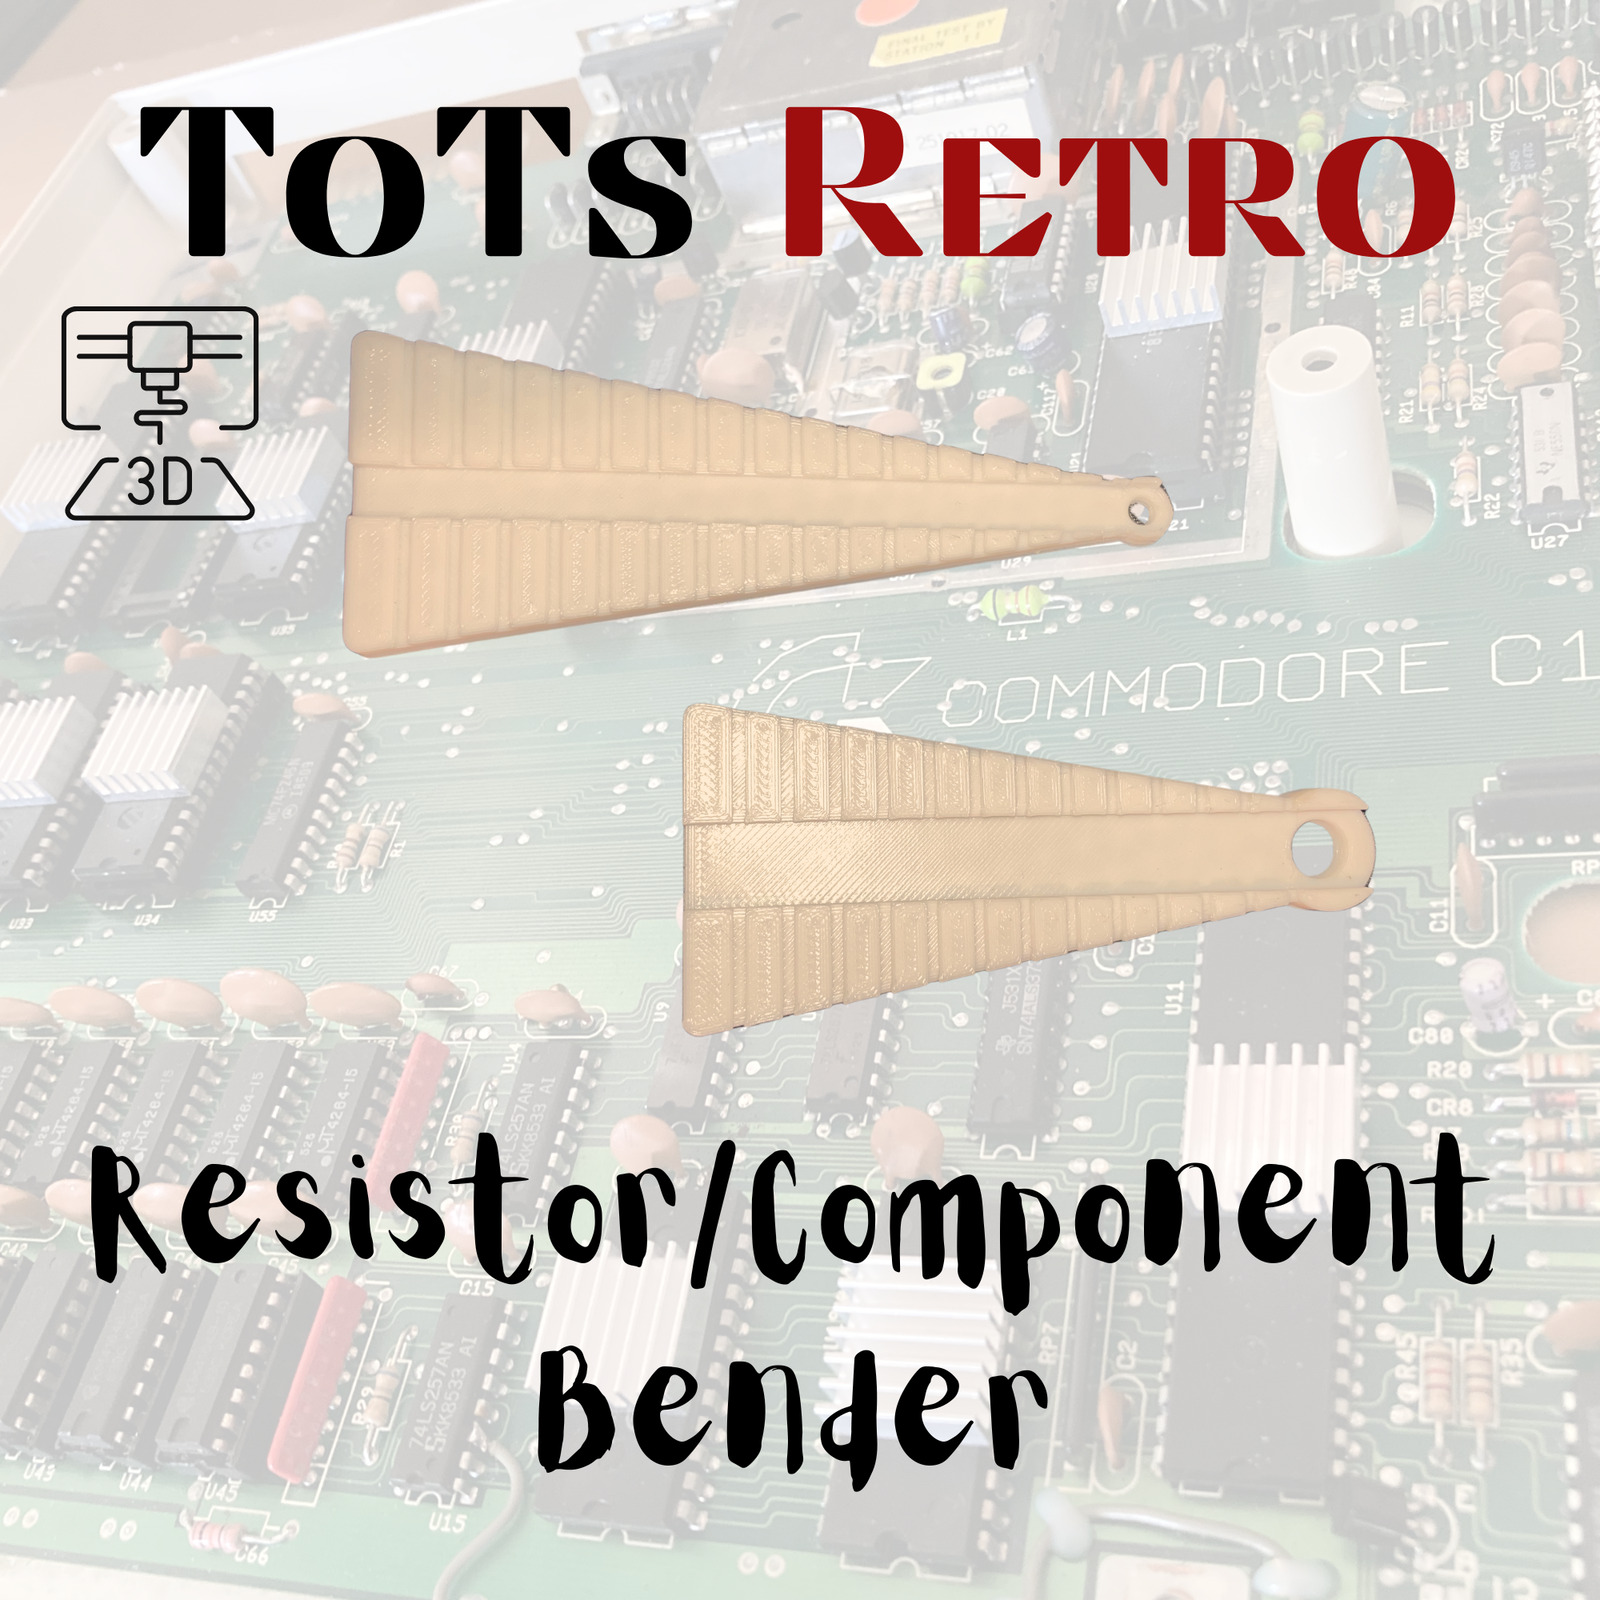 Resister Bender Tool 3d Printed Used for My Commodore Projects